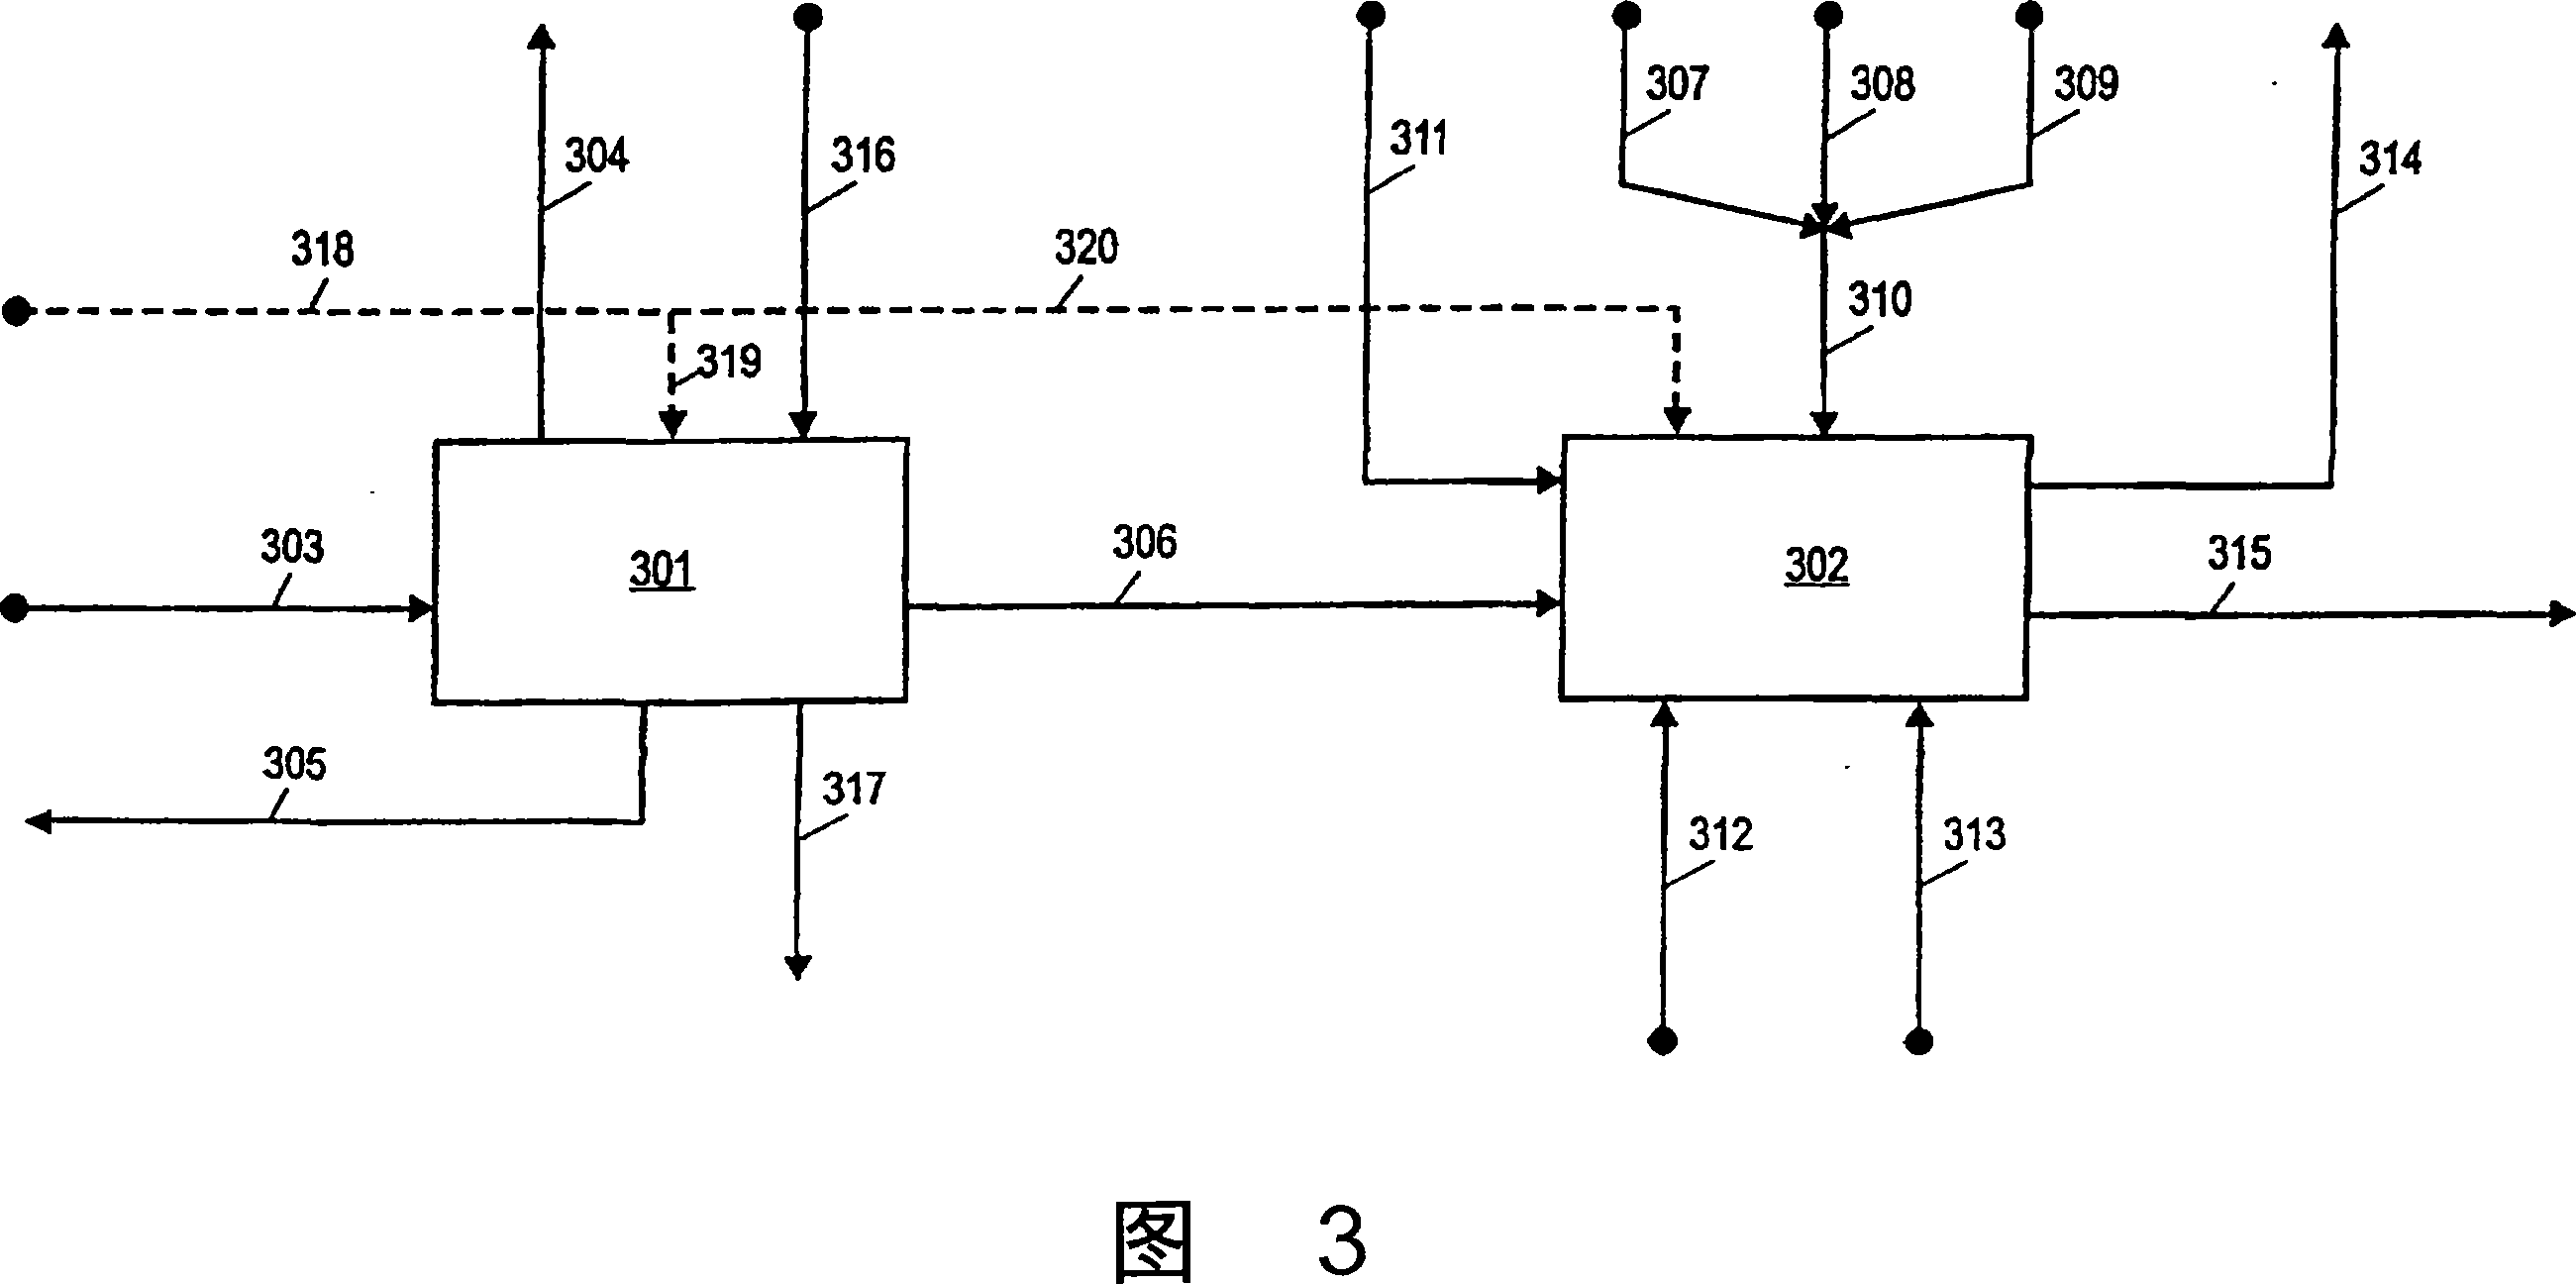 Method of slurry dewatering and conversion of biosolids to a renewable fuel